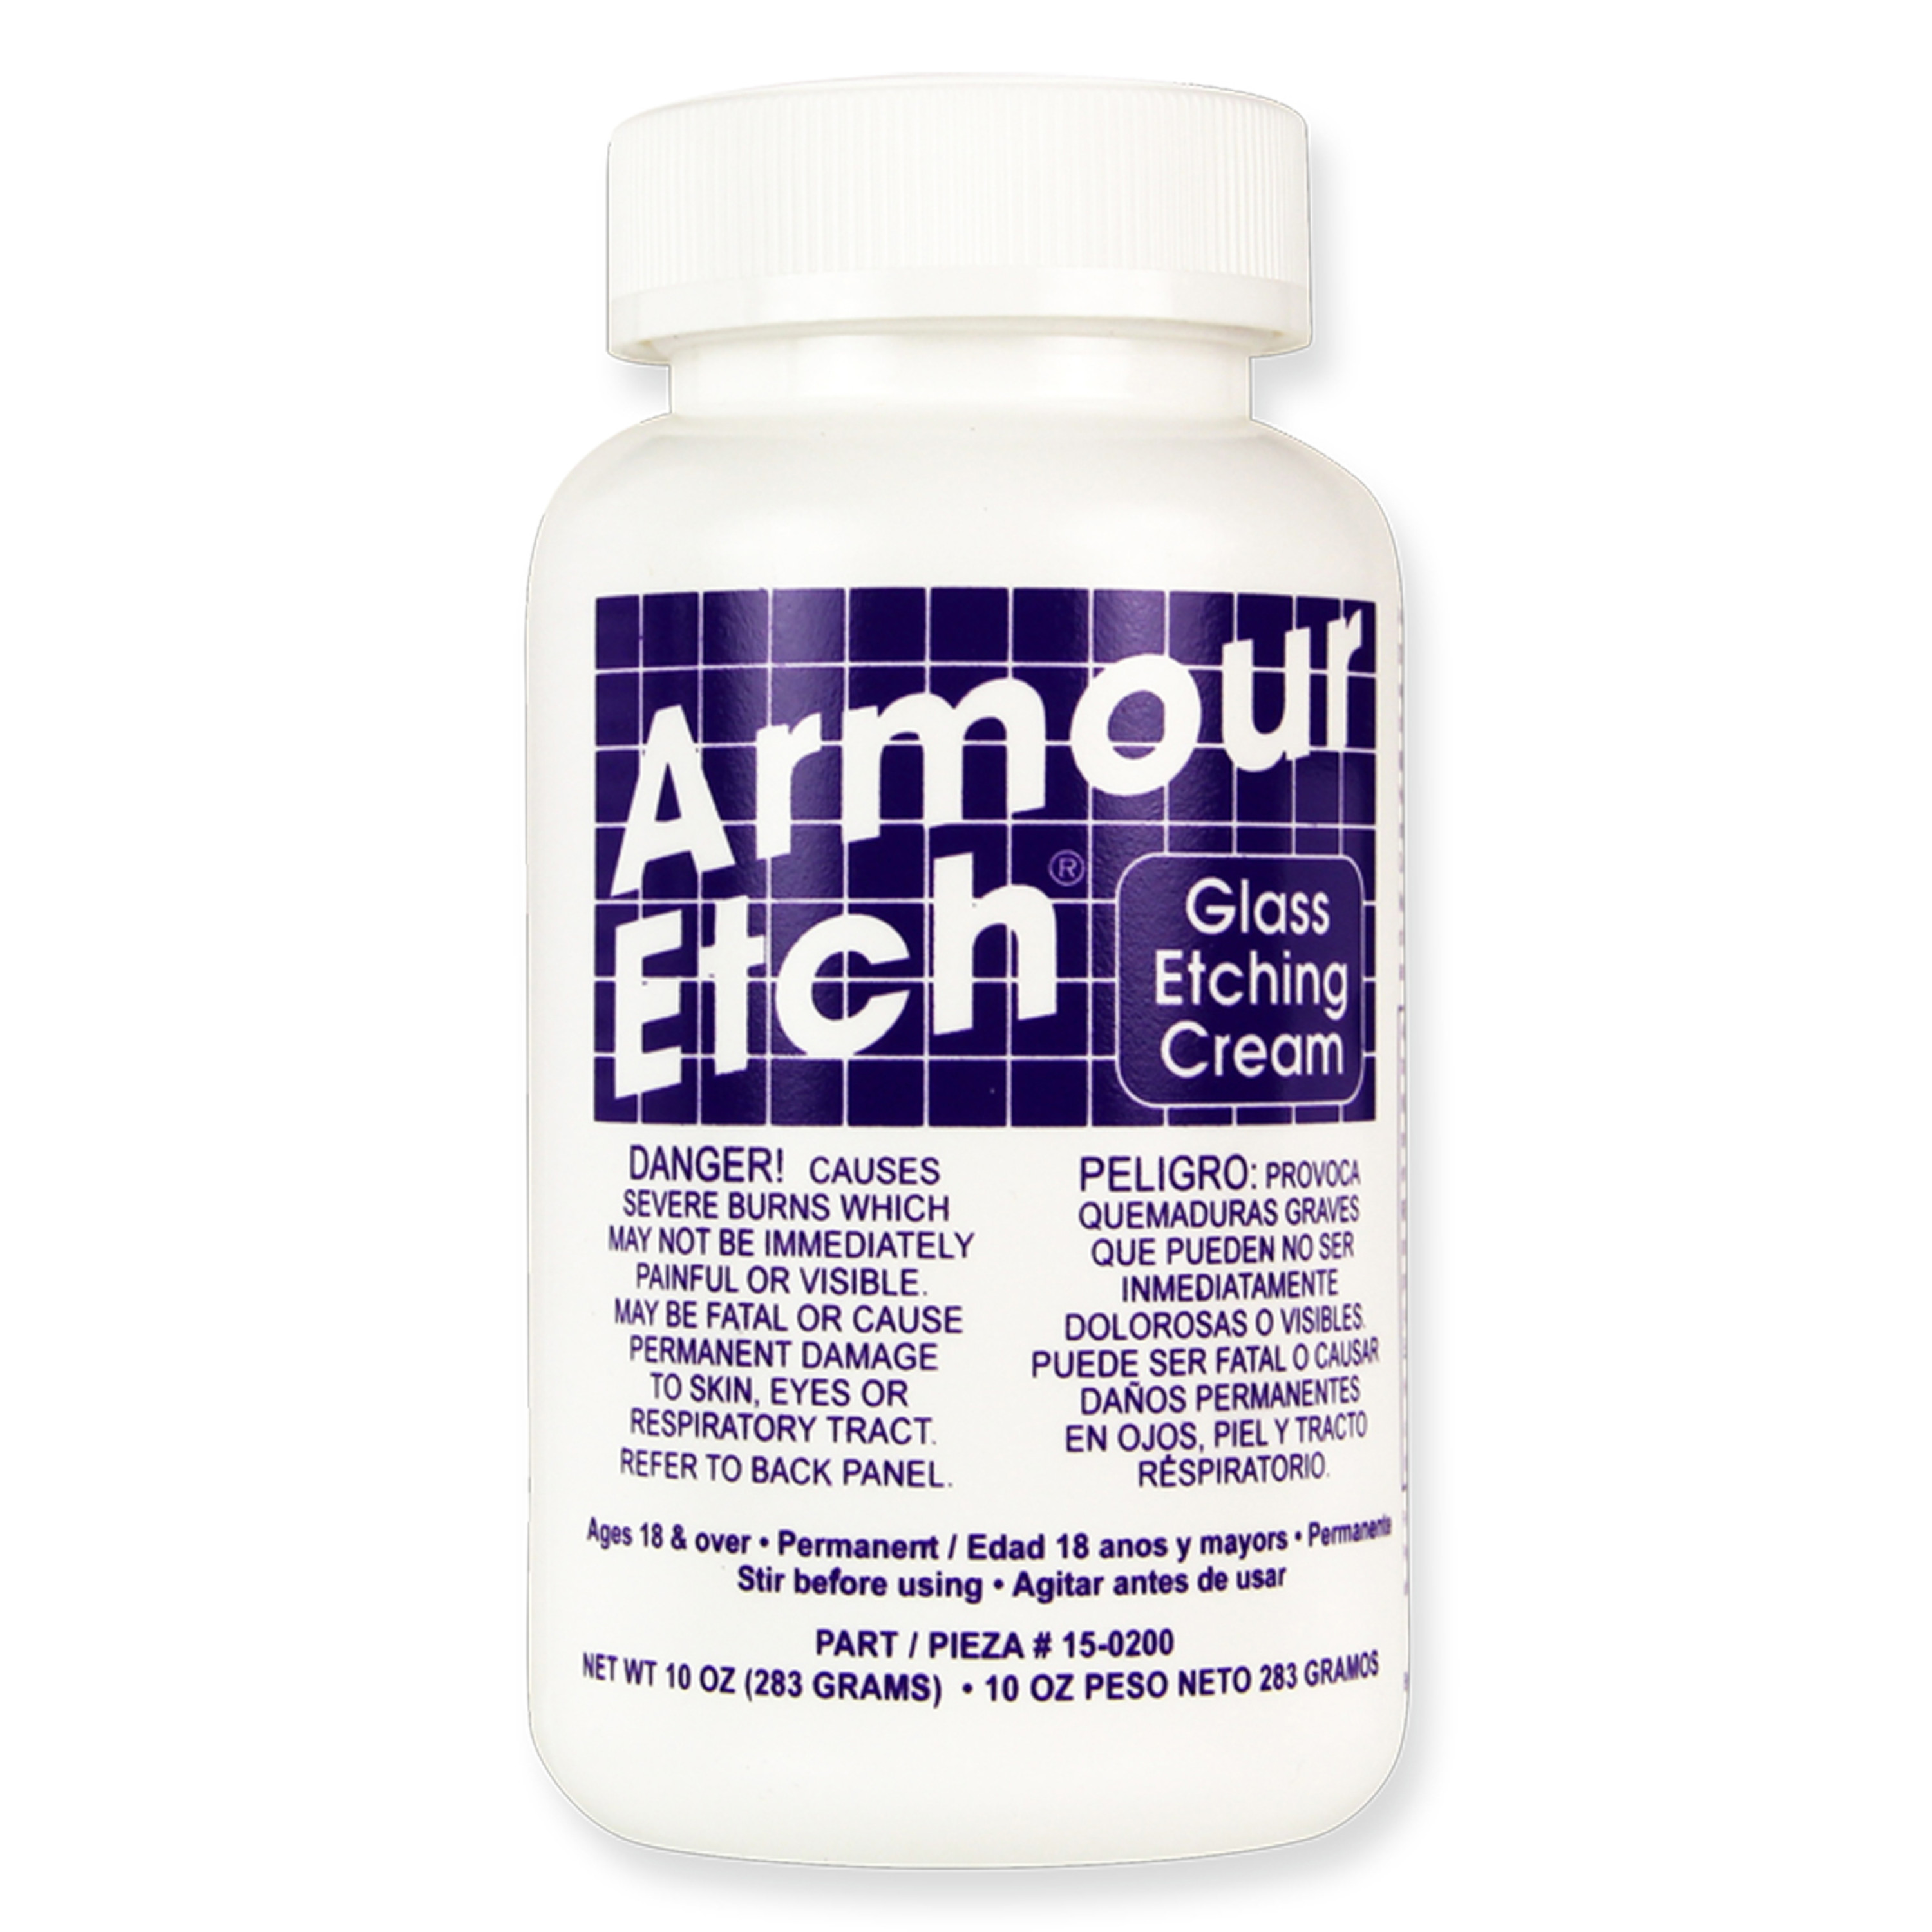 Armour Etch Glass Etching Cream, 10 oz. - image 1 of 2